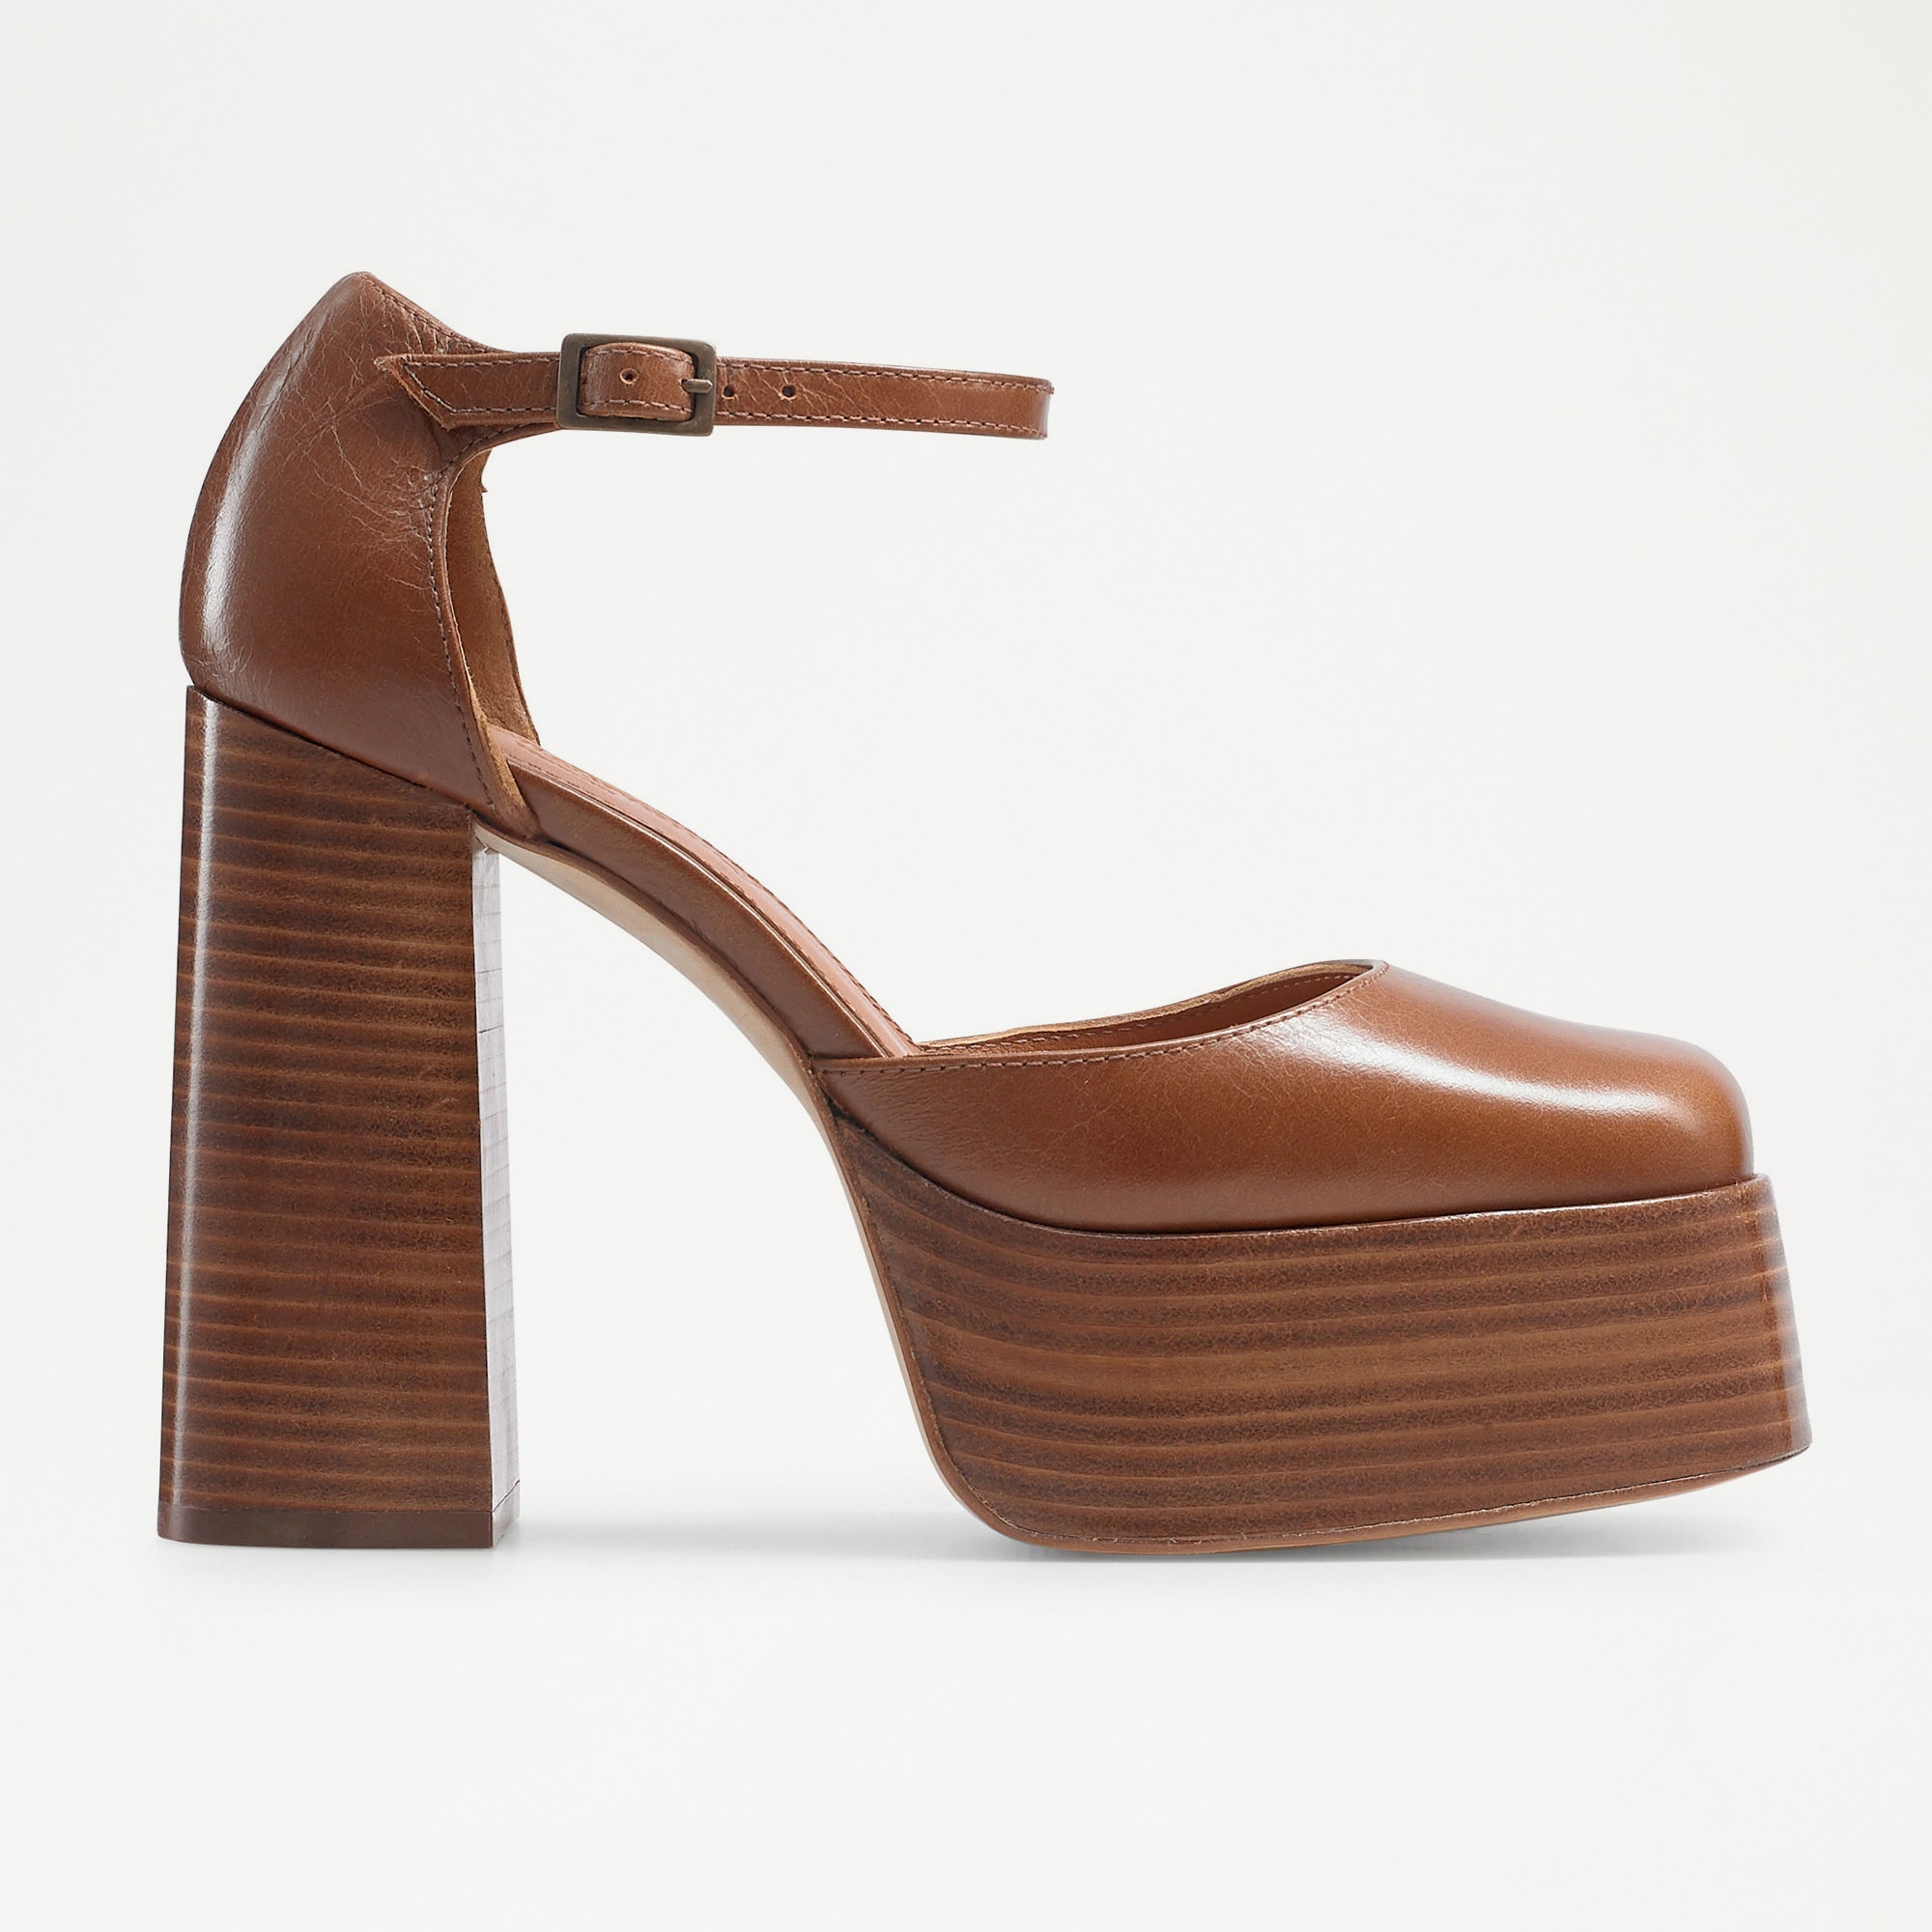 Russell & Bromley Women's Tan Brown Calf Leather BLONDIE Stacked Platform Heel Sandals, Size: UK 7